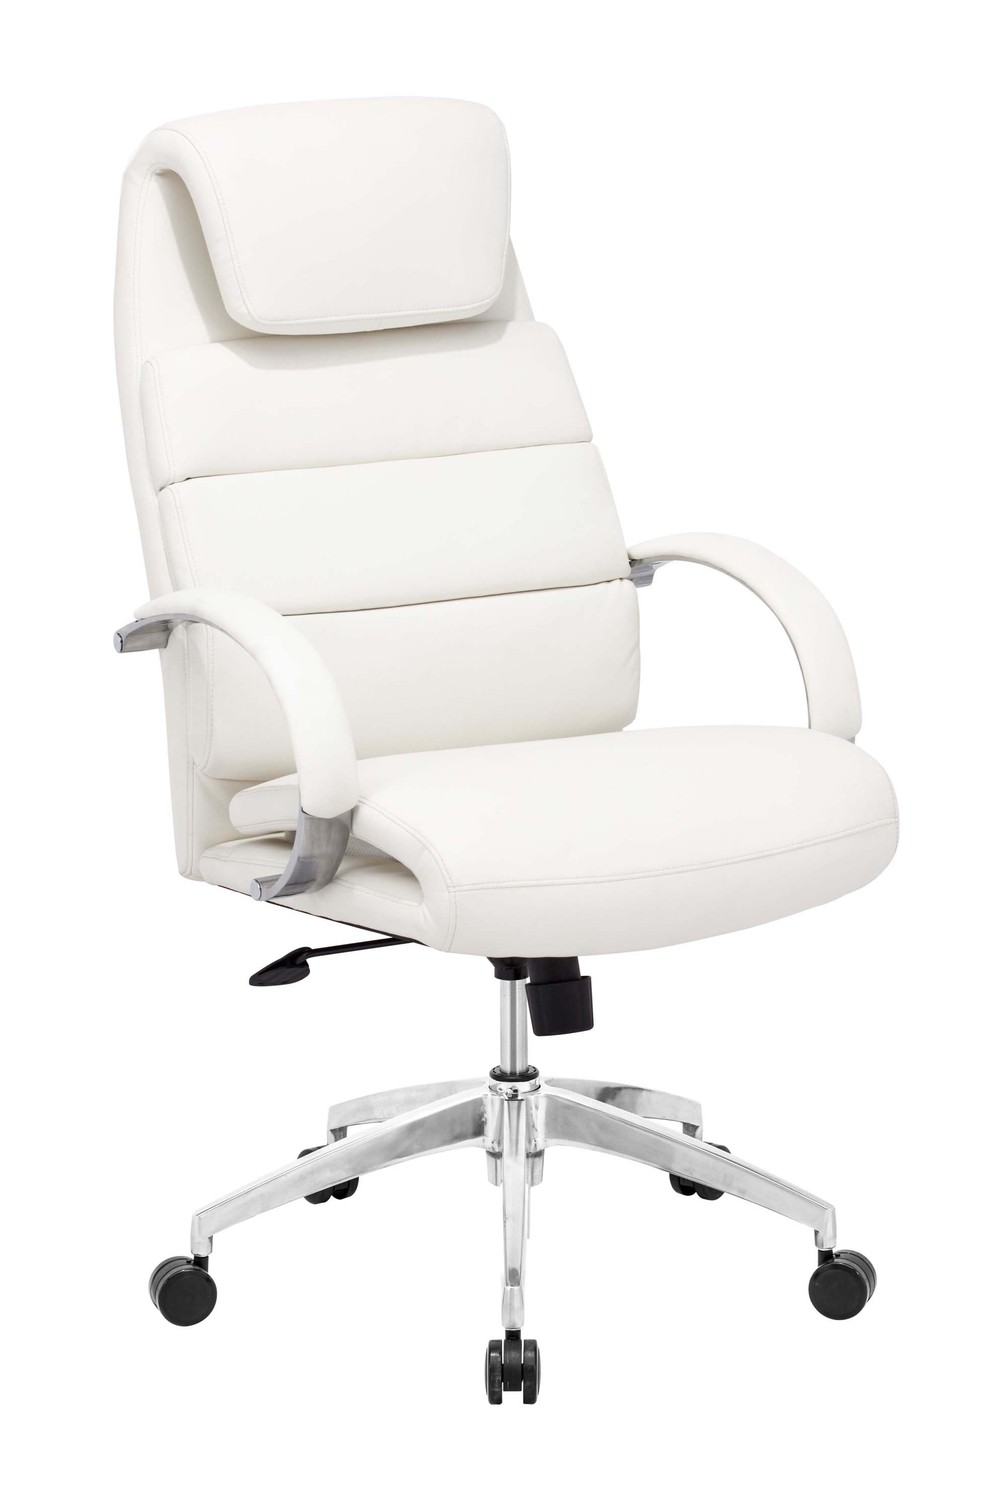 27.5" x 27.5" x 44.5" White, Leatherette, Polished Aluminum, Comfort Office Chair